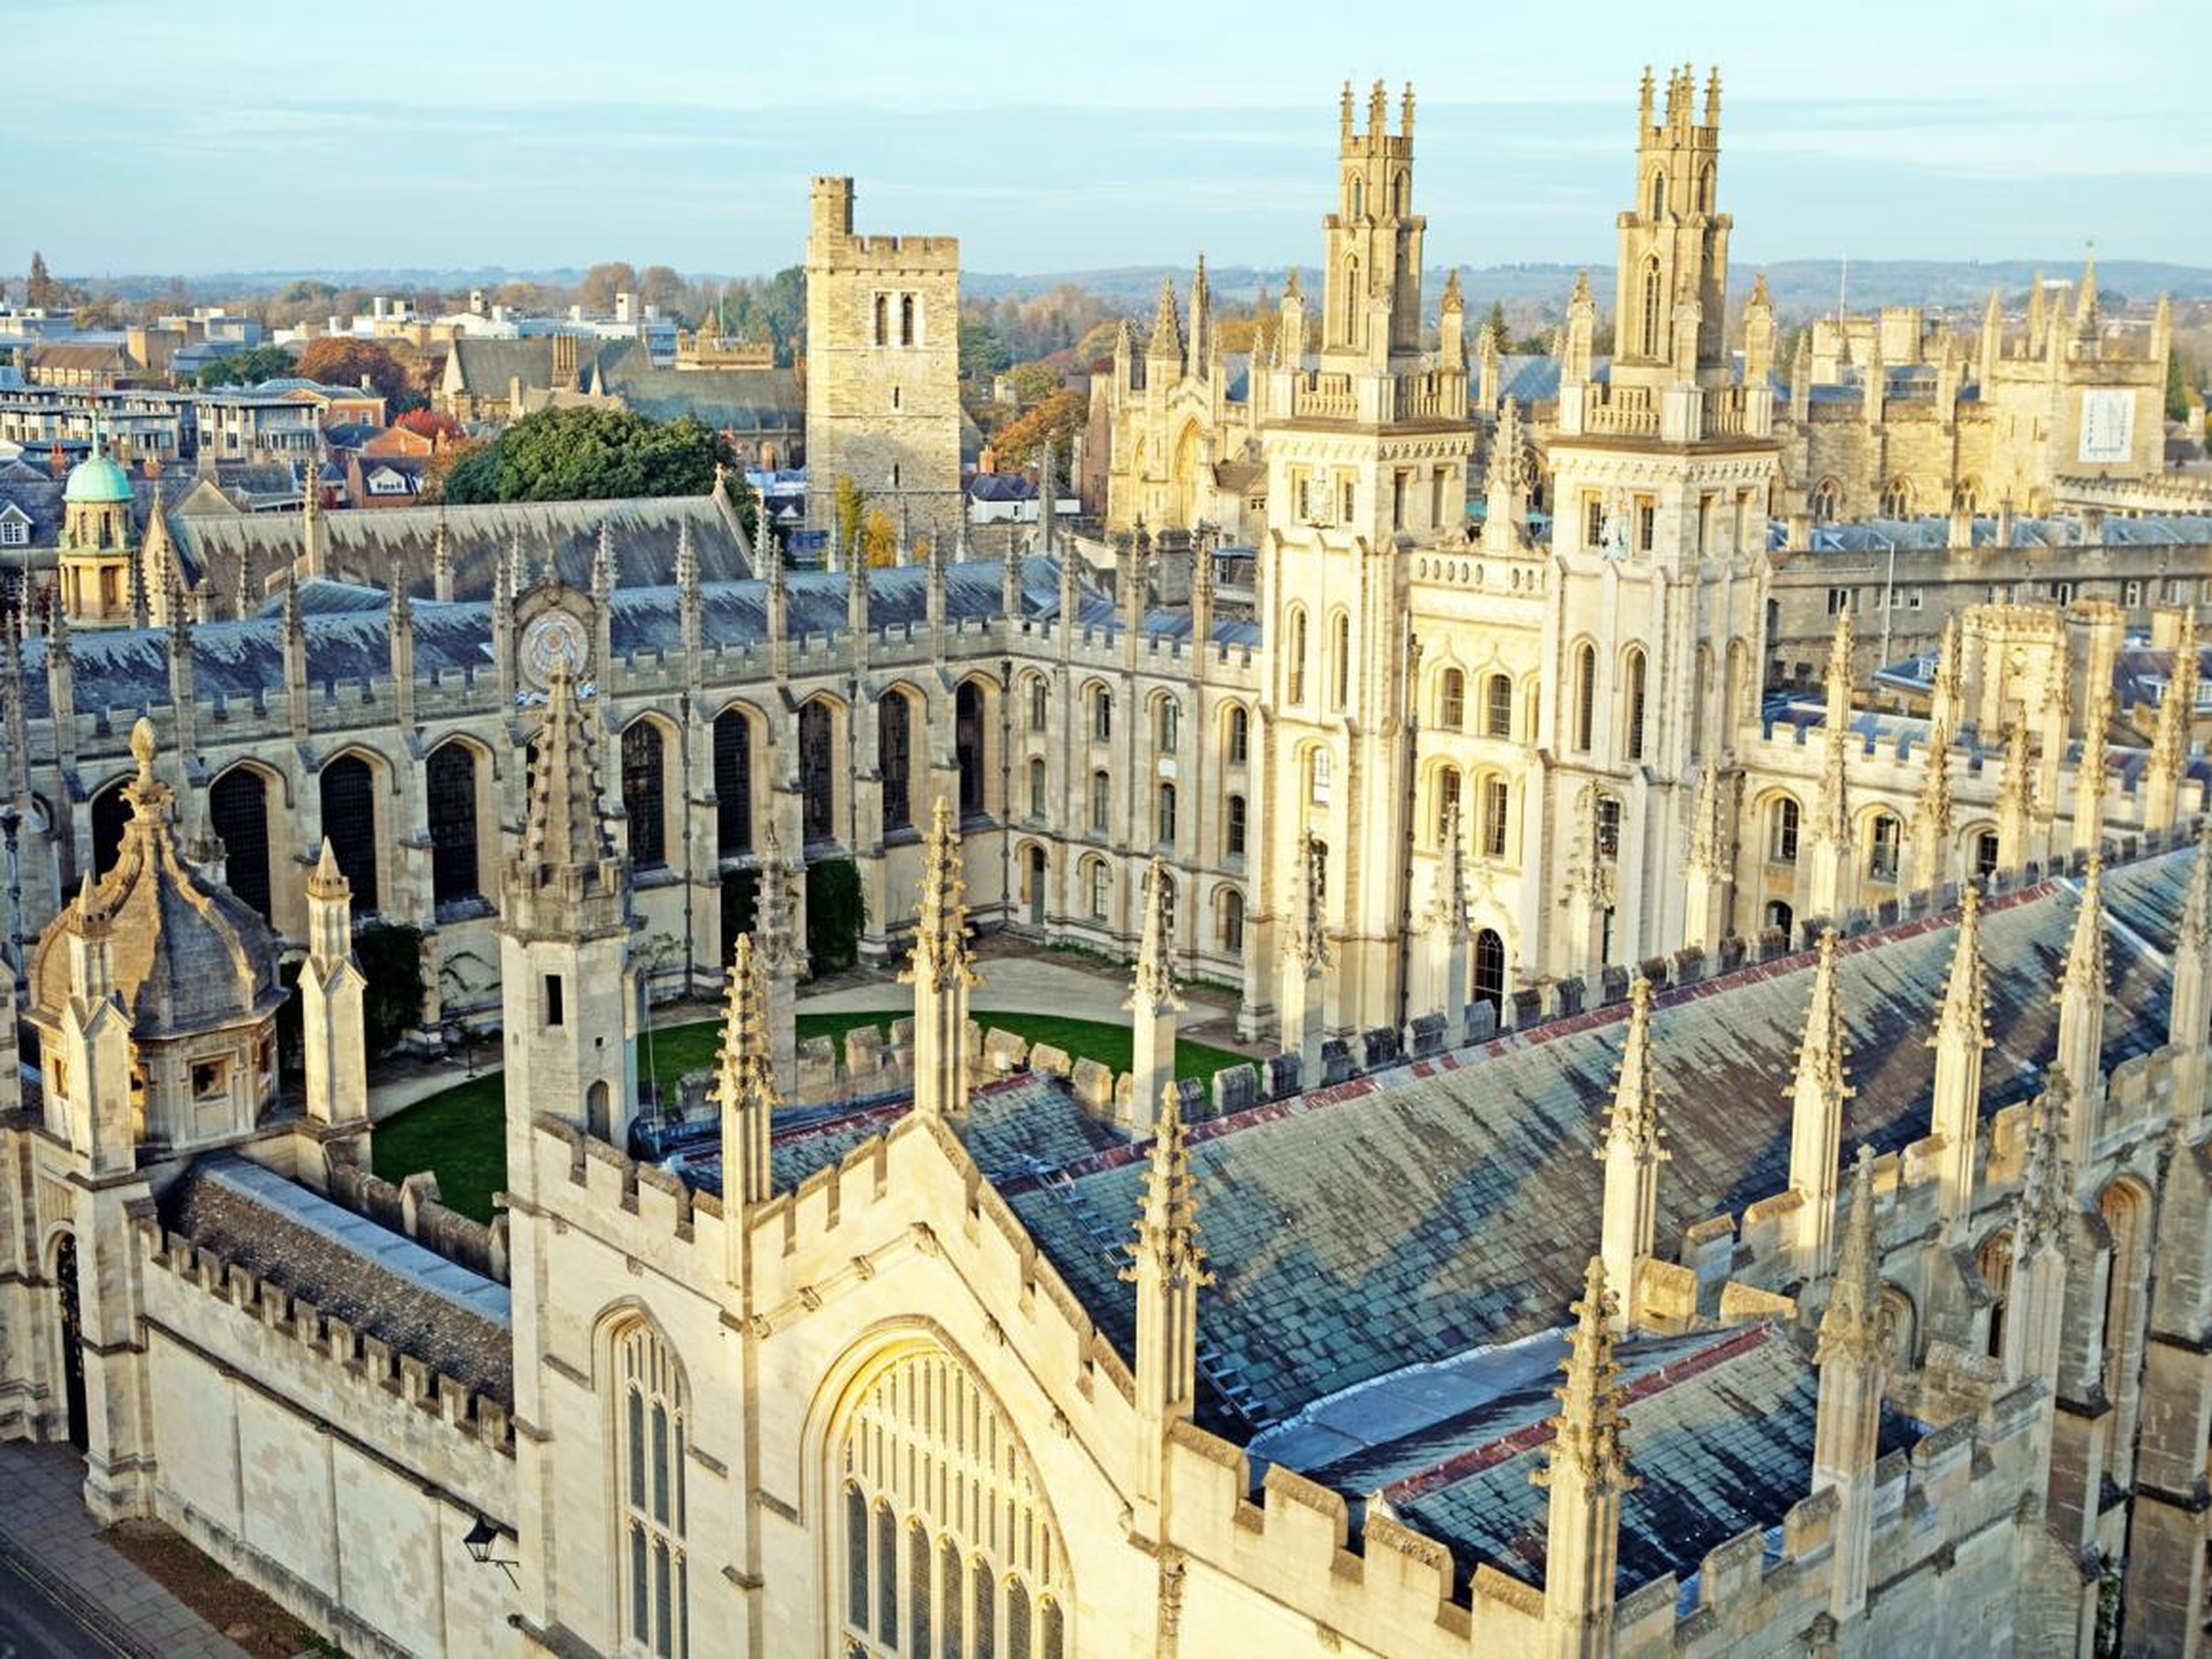 Oxford University is older than the Aztec Empire.